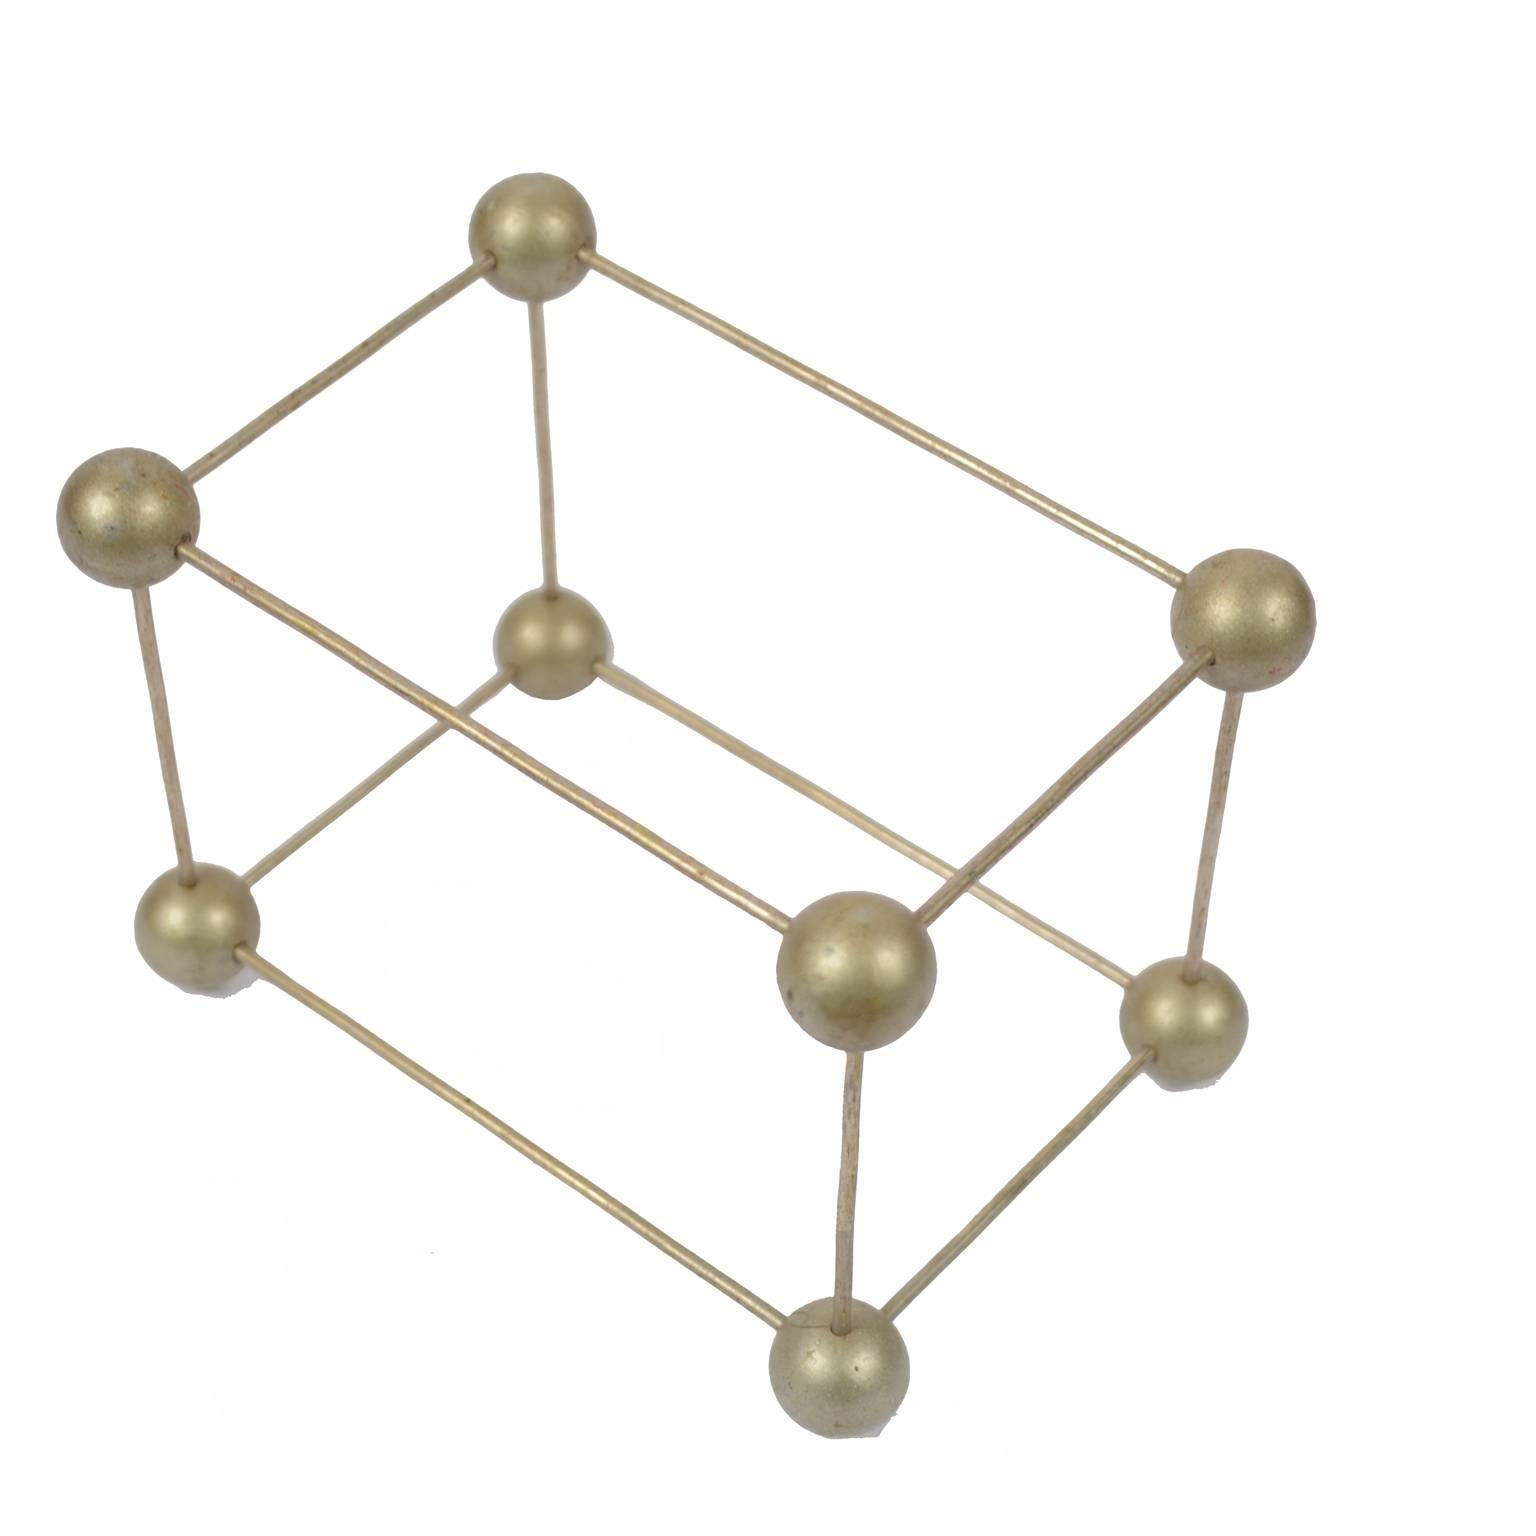 Molecular structure of iron/sulfur cluster (Fe4S4) for educational use, metal with wooden spheres grey painted. Czechoslovak manufacture of the 50s. Very good condition. Measures cm: 14.7 x 10.5.
Shipping is insured by Lloyd's London; our gift box